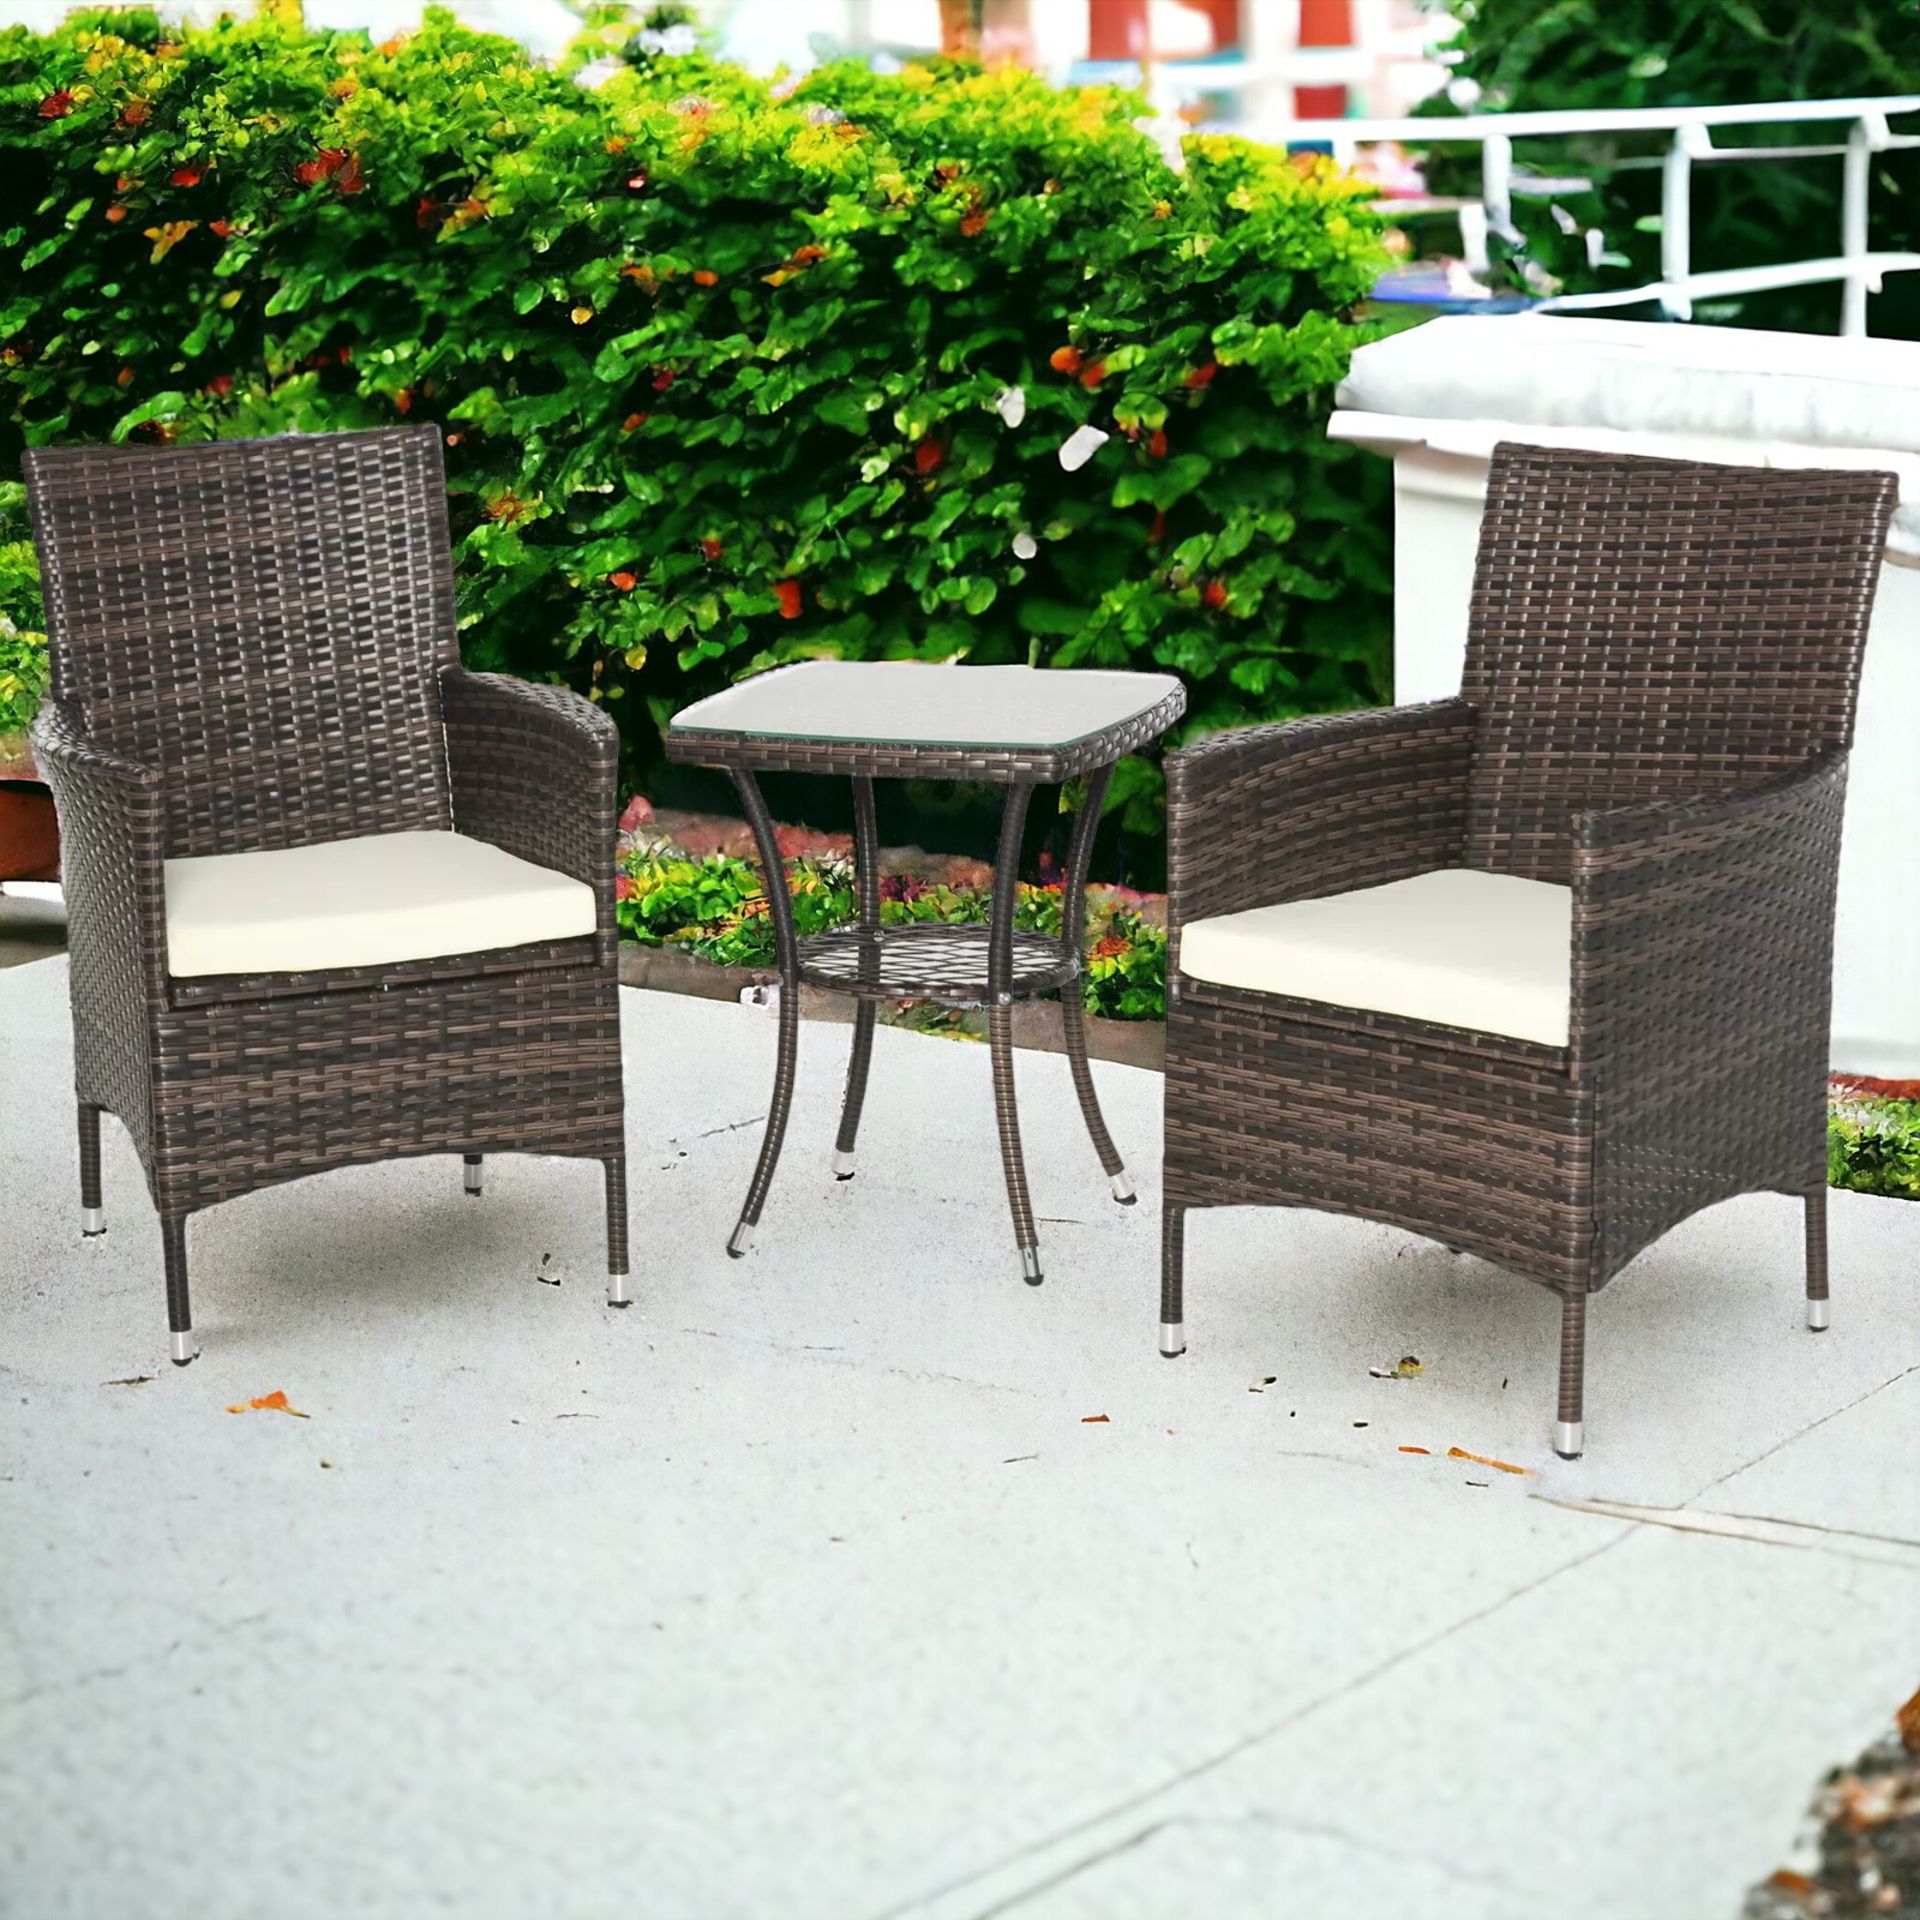 FREE DELIVERY- BRAND NEW RATTAN BISTRO SET GARDEN CHAIR TABLE PATIO OUTDOOR CUSHION